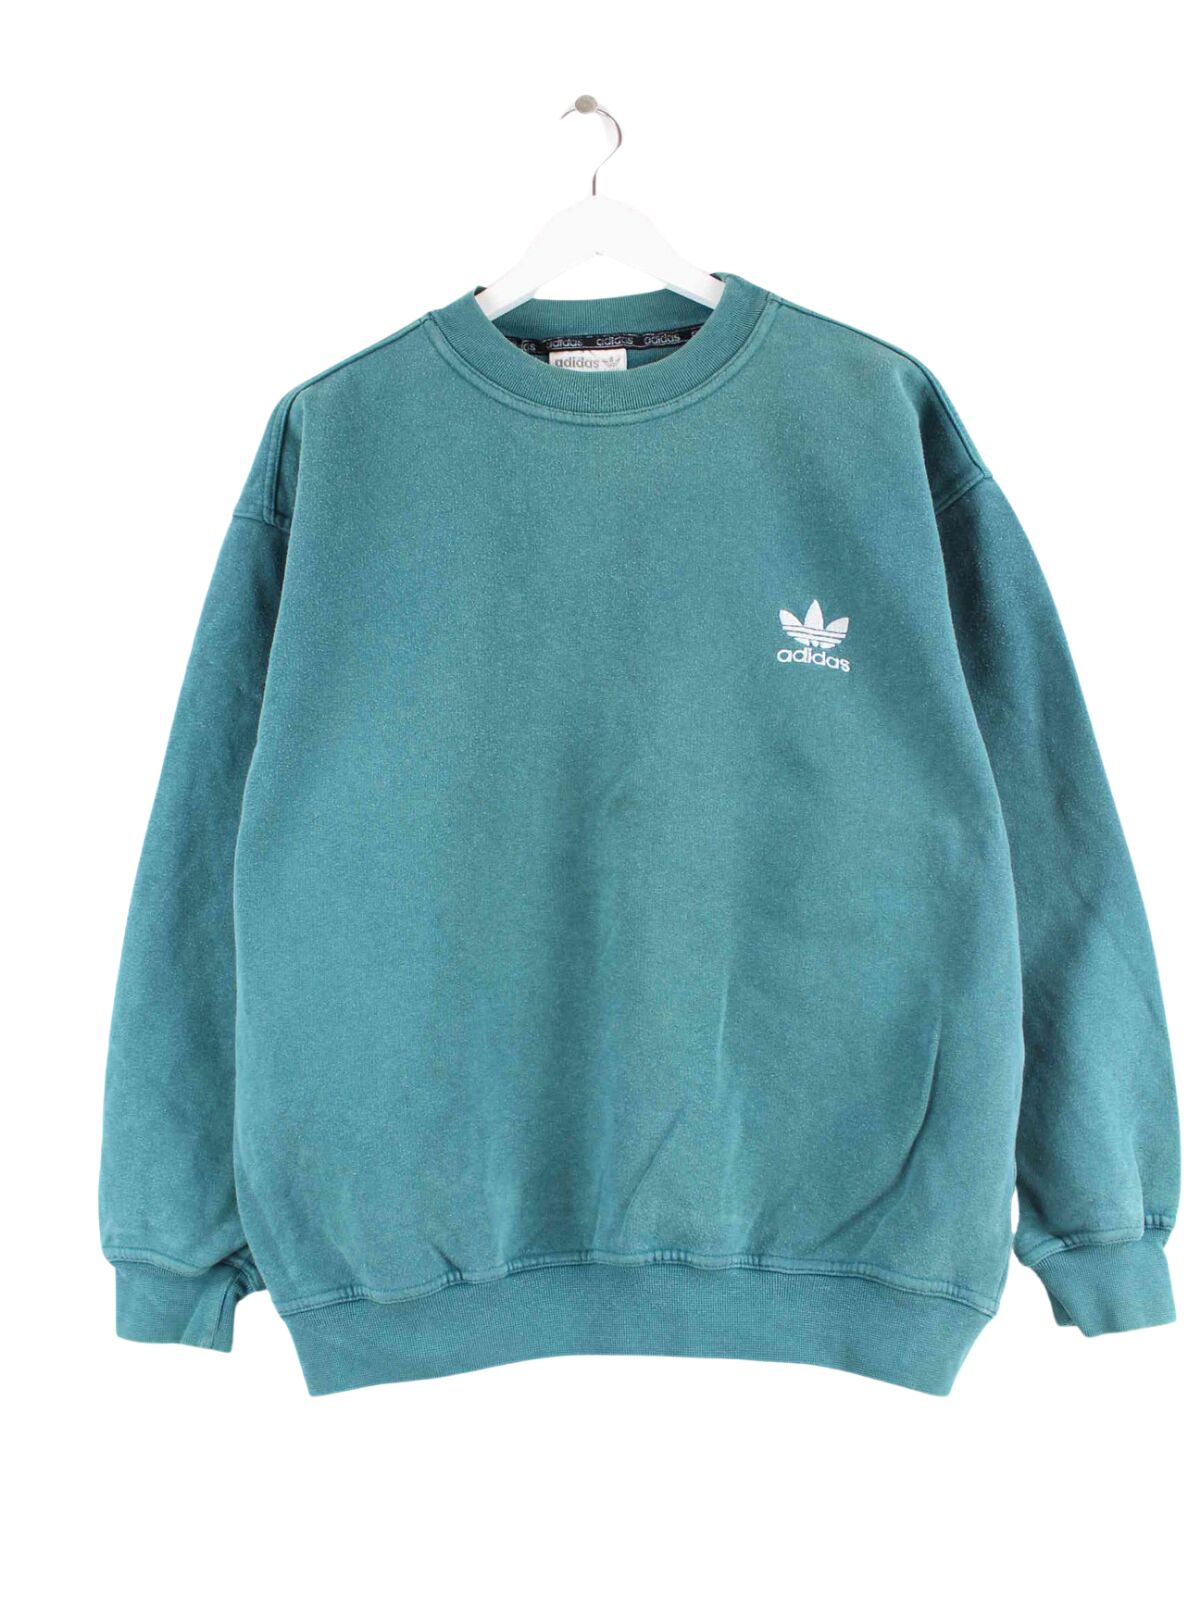 Adidas 80s Vintage Trefoil Embroidered Sweater Grün S (front image)